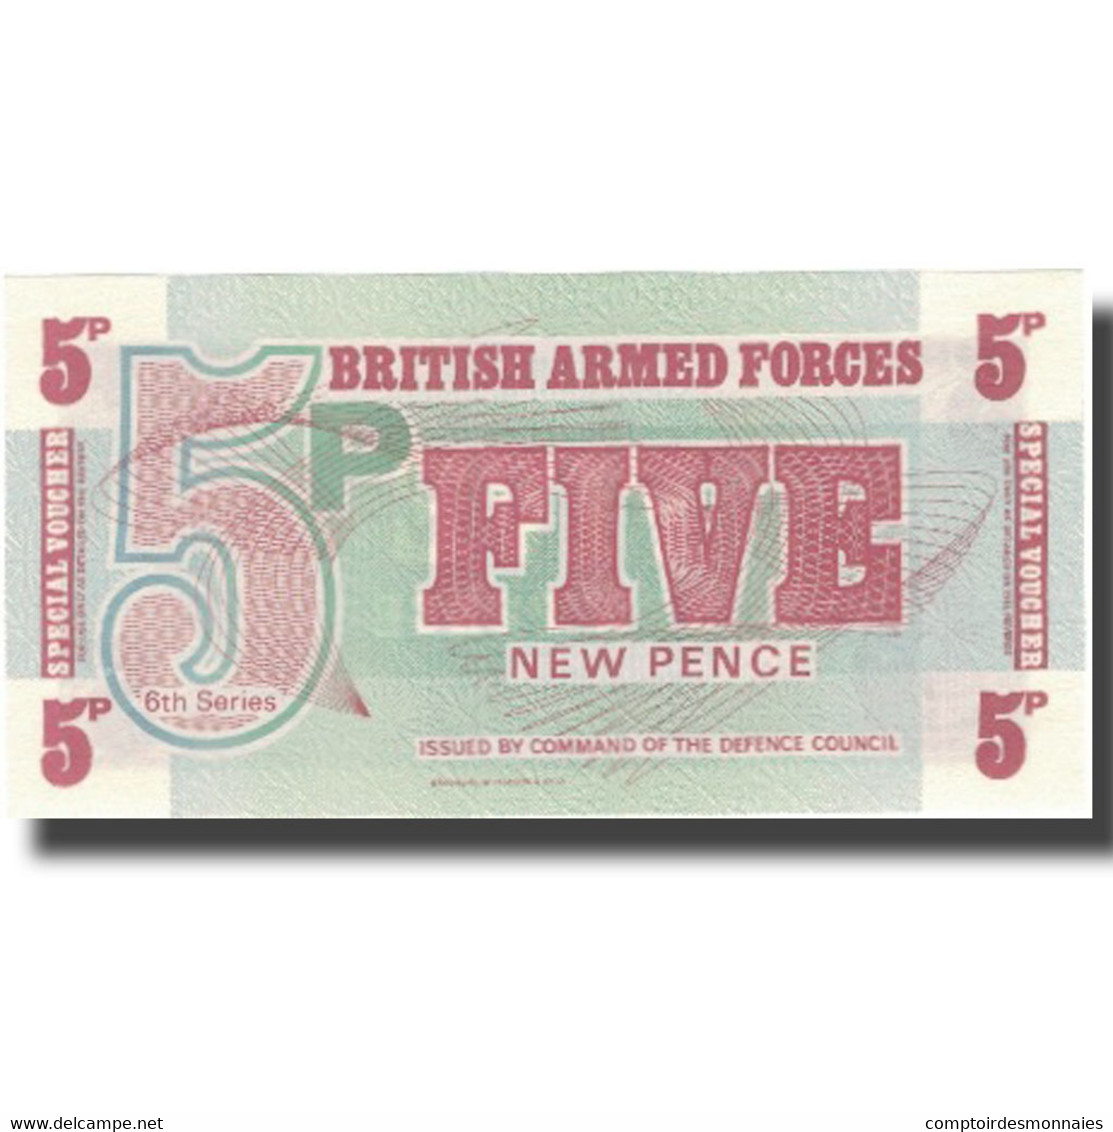 Billet, Grande-Bretagne, 5 New Pence, KM:M44a, NEUF - British Armed Forces & Special Vouchers